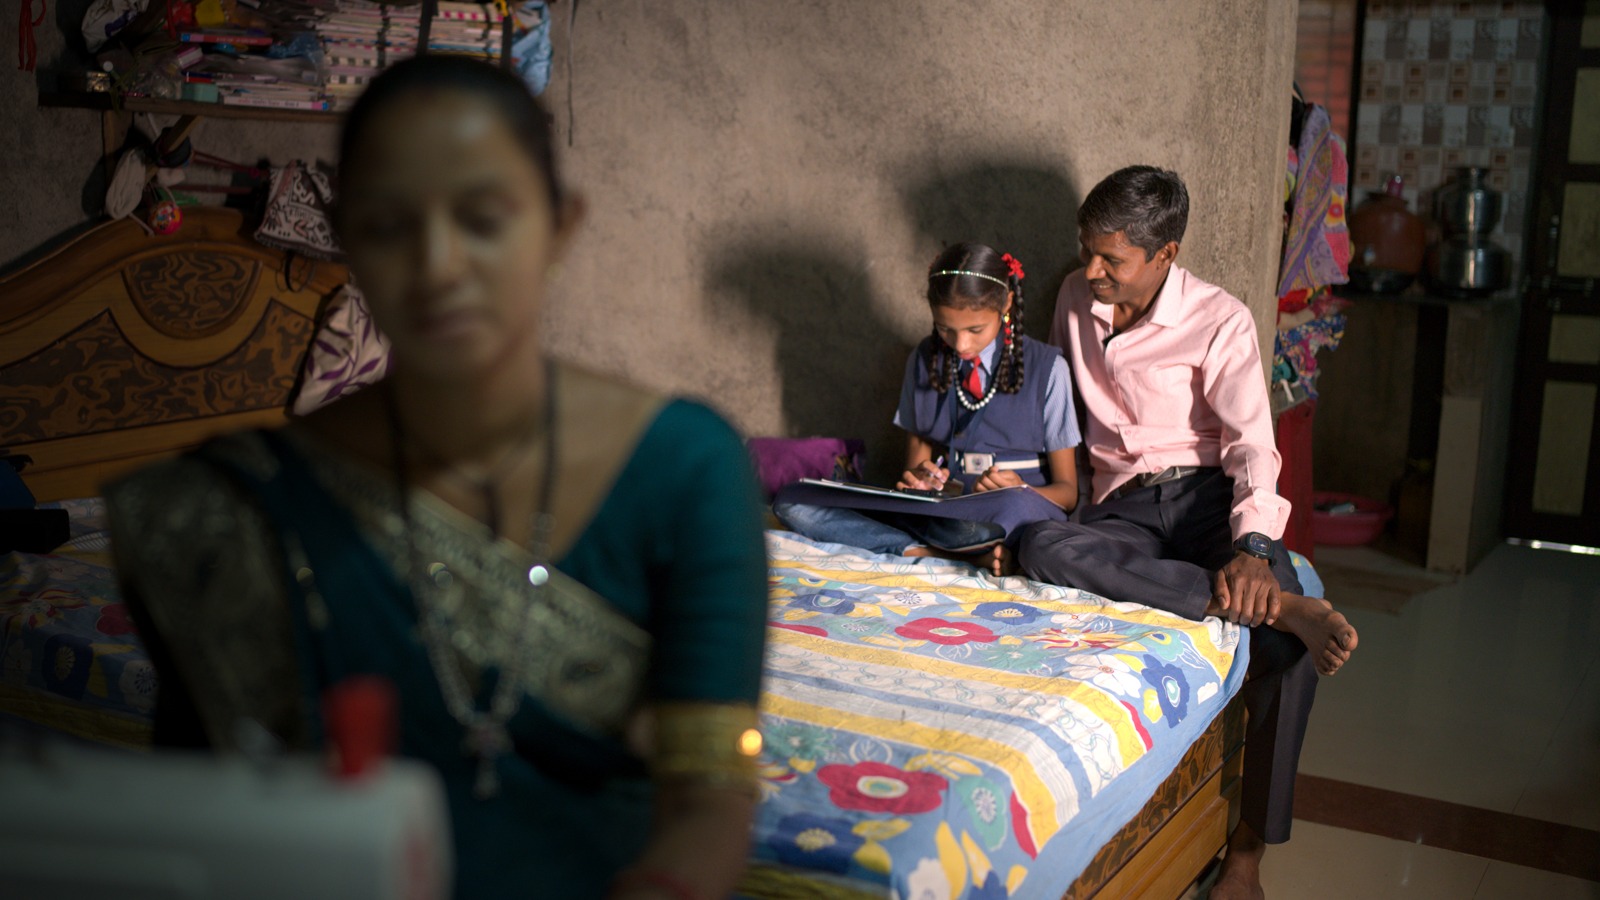 Young girl in a school uniform works on homework on a tablet in her family home with her parents.